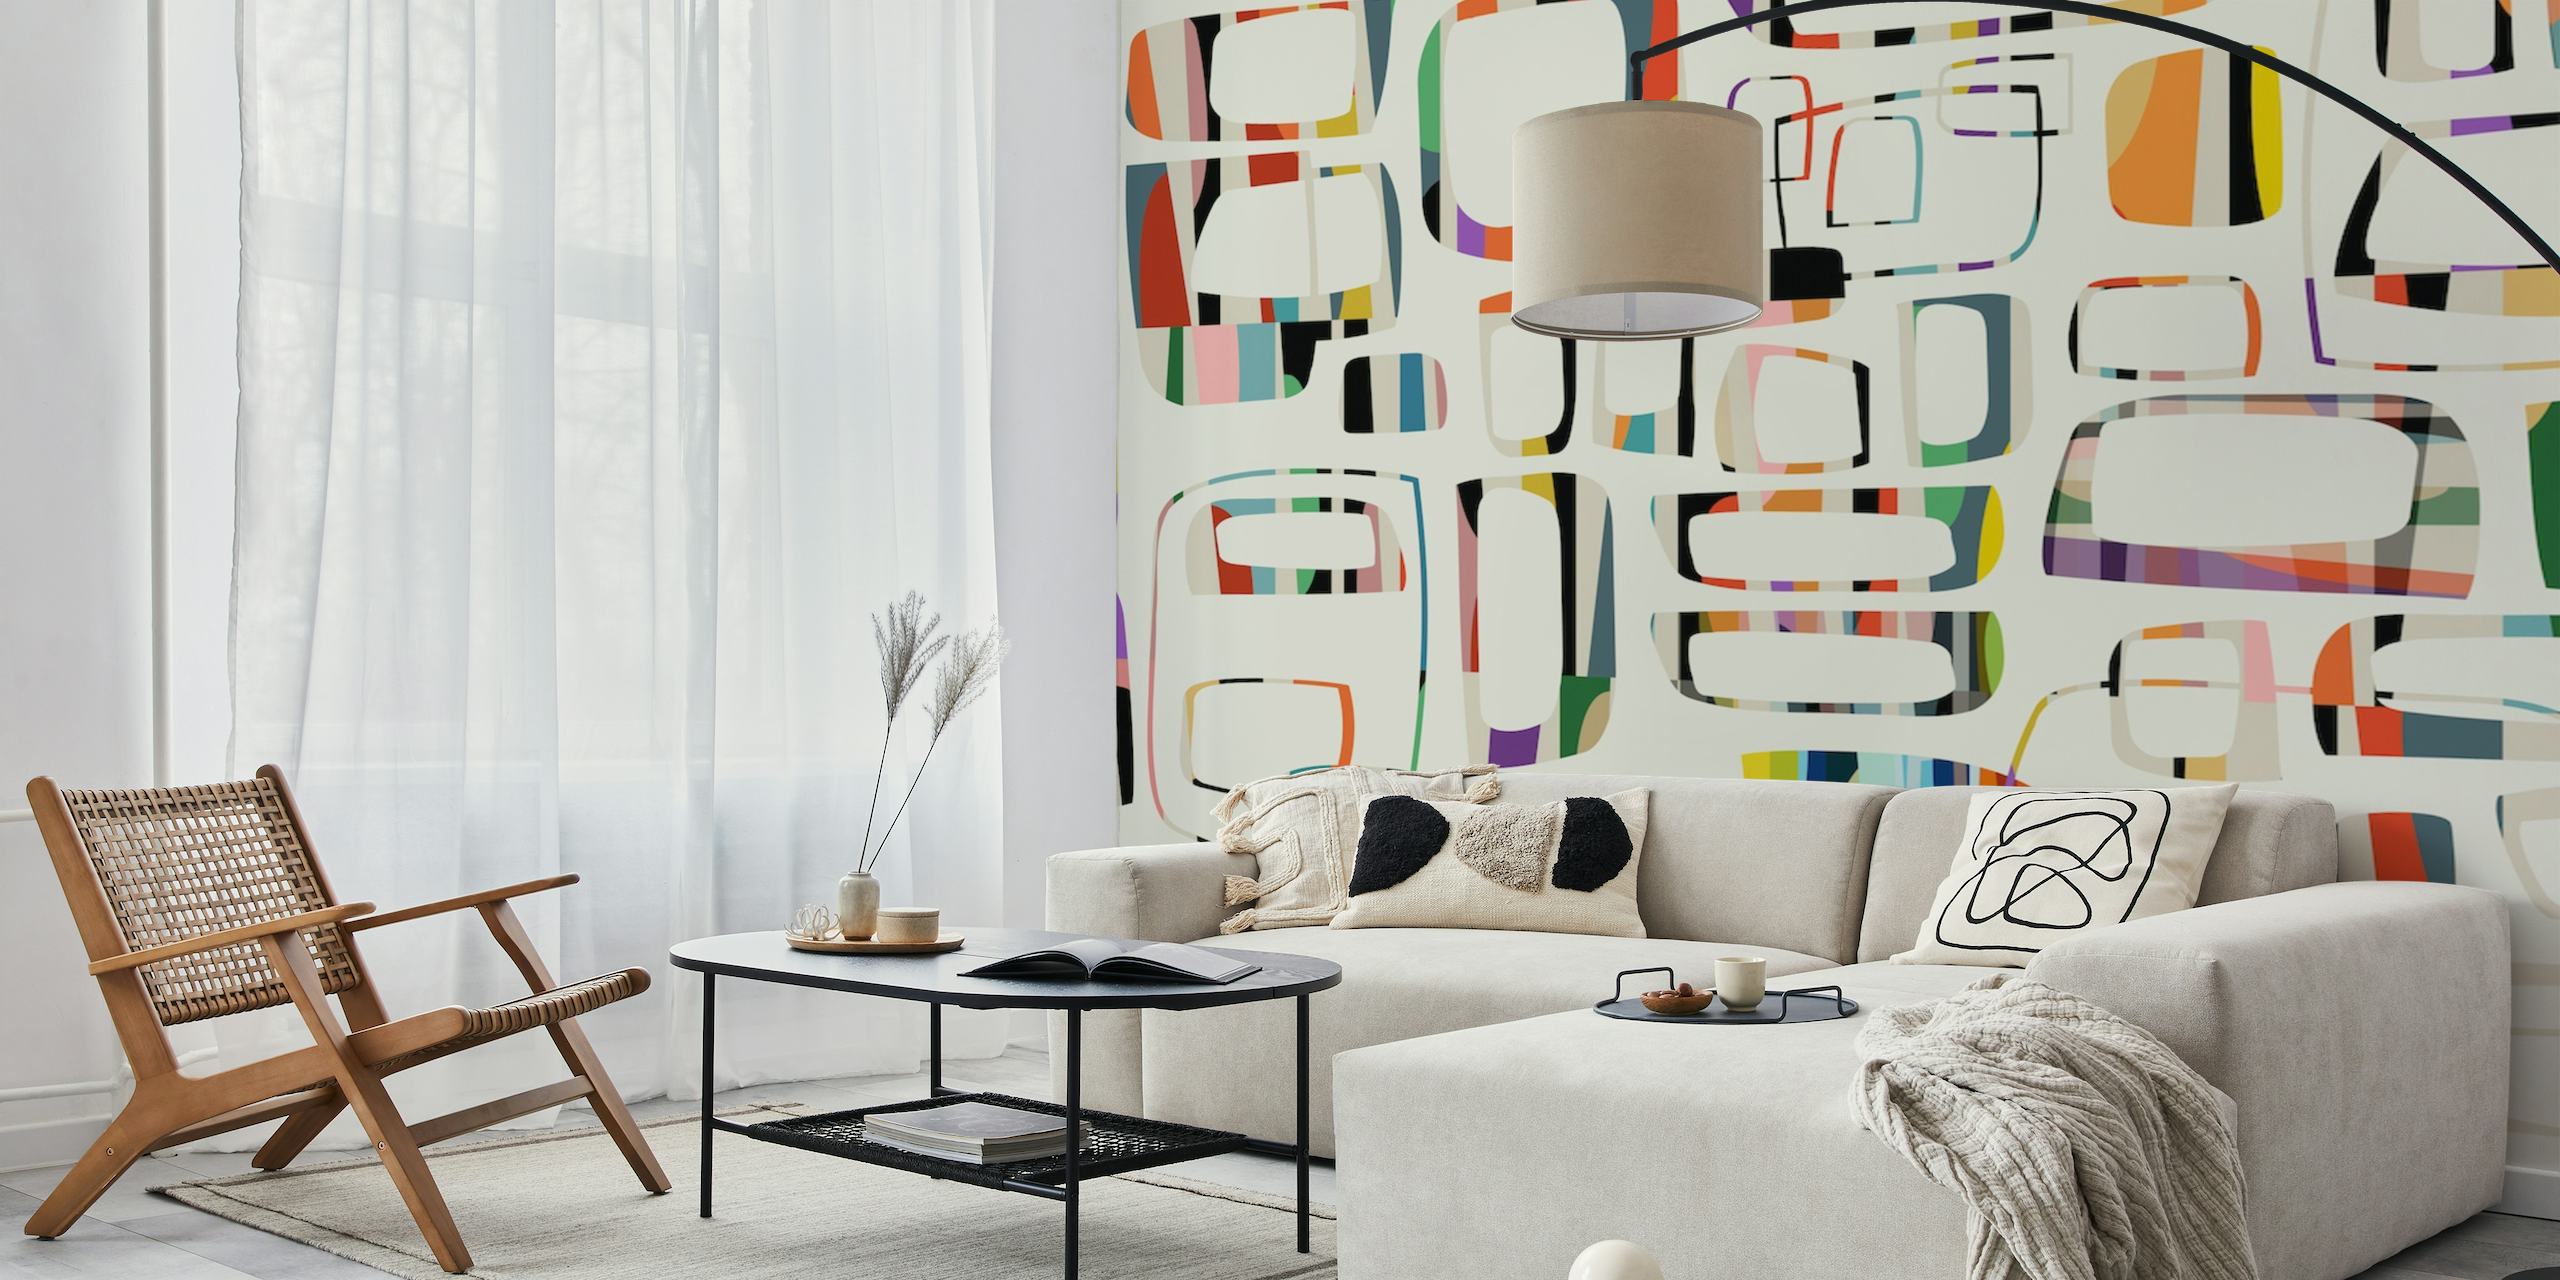 Abstract geometric wall mural with playful shapes and colors